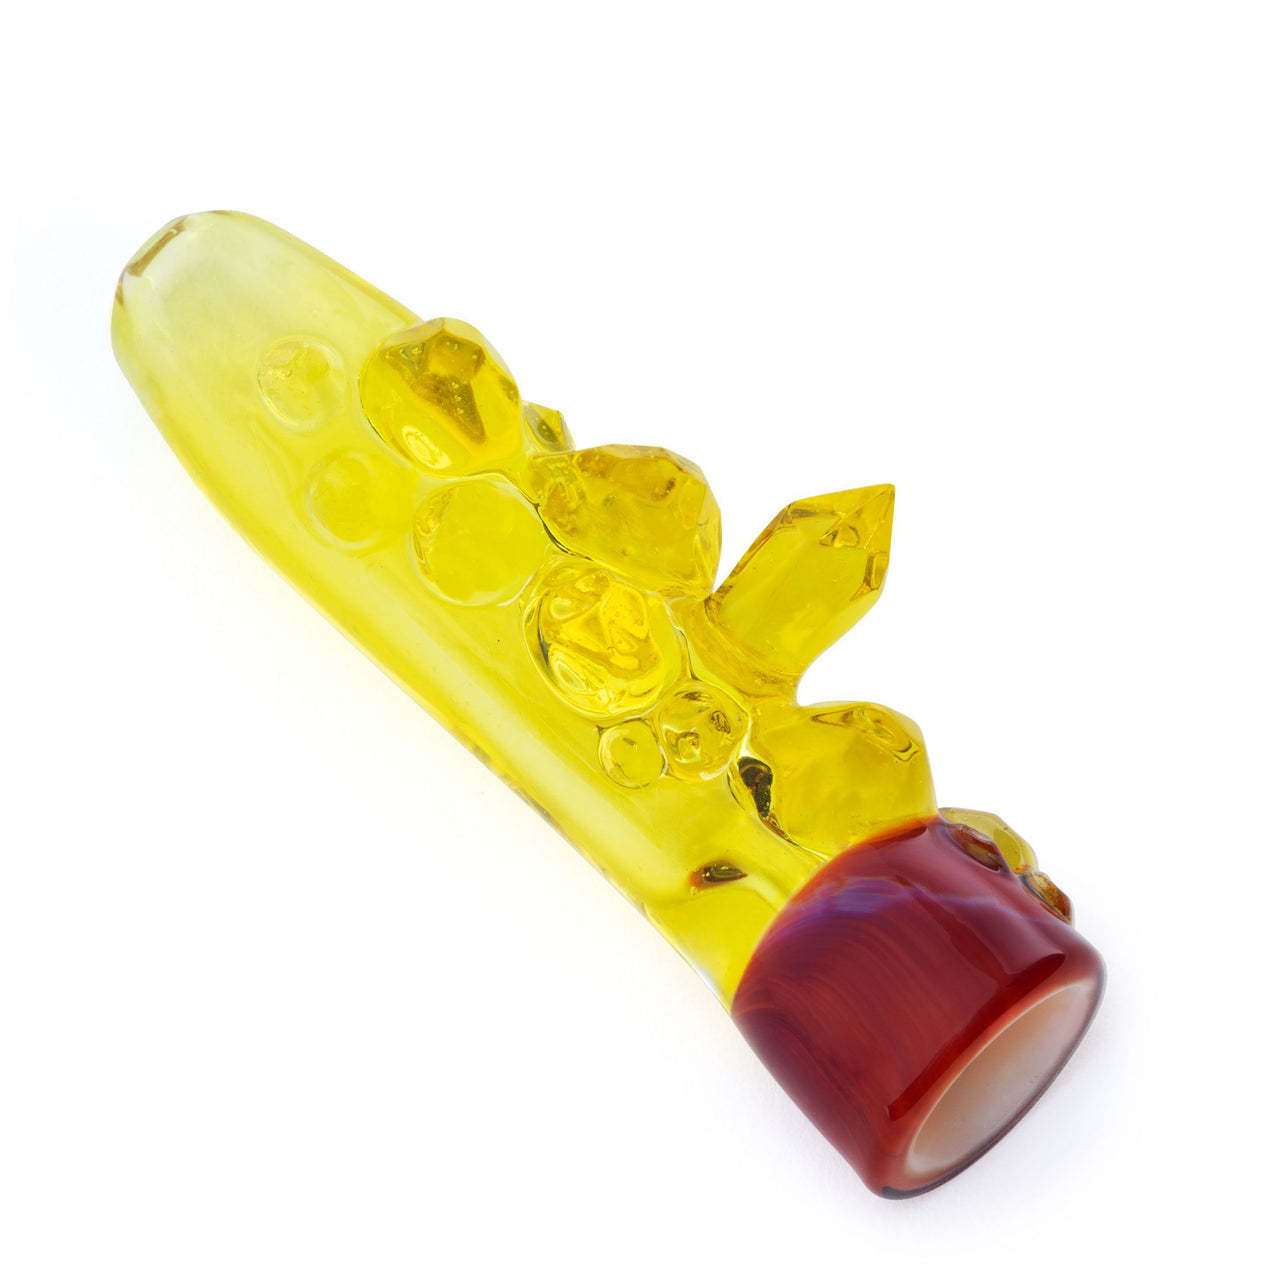 Northern Waters Glass Chillum - Lemon Drop/Serendipity w/Terps CFL Cluster